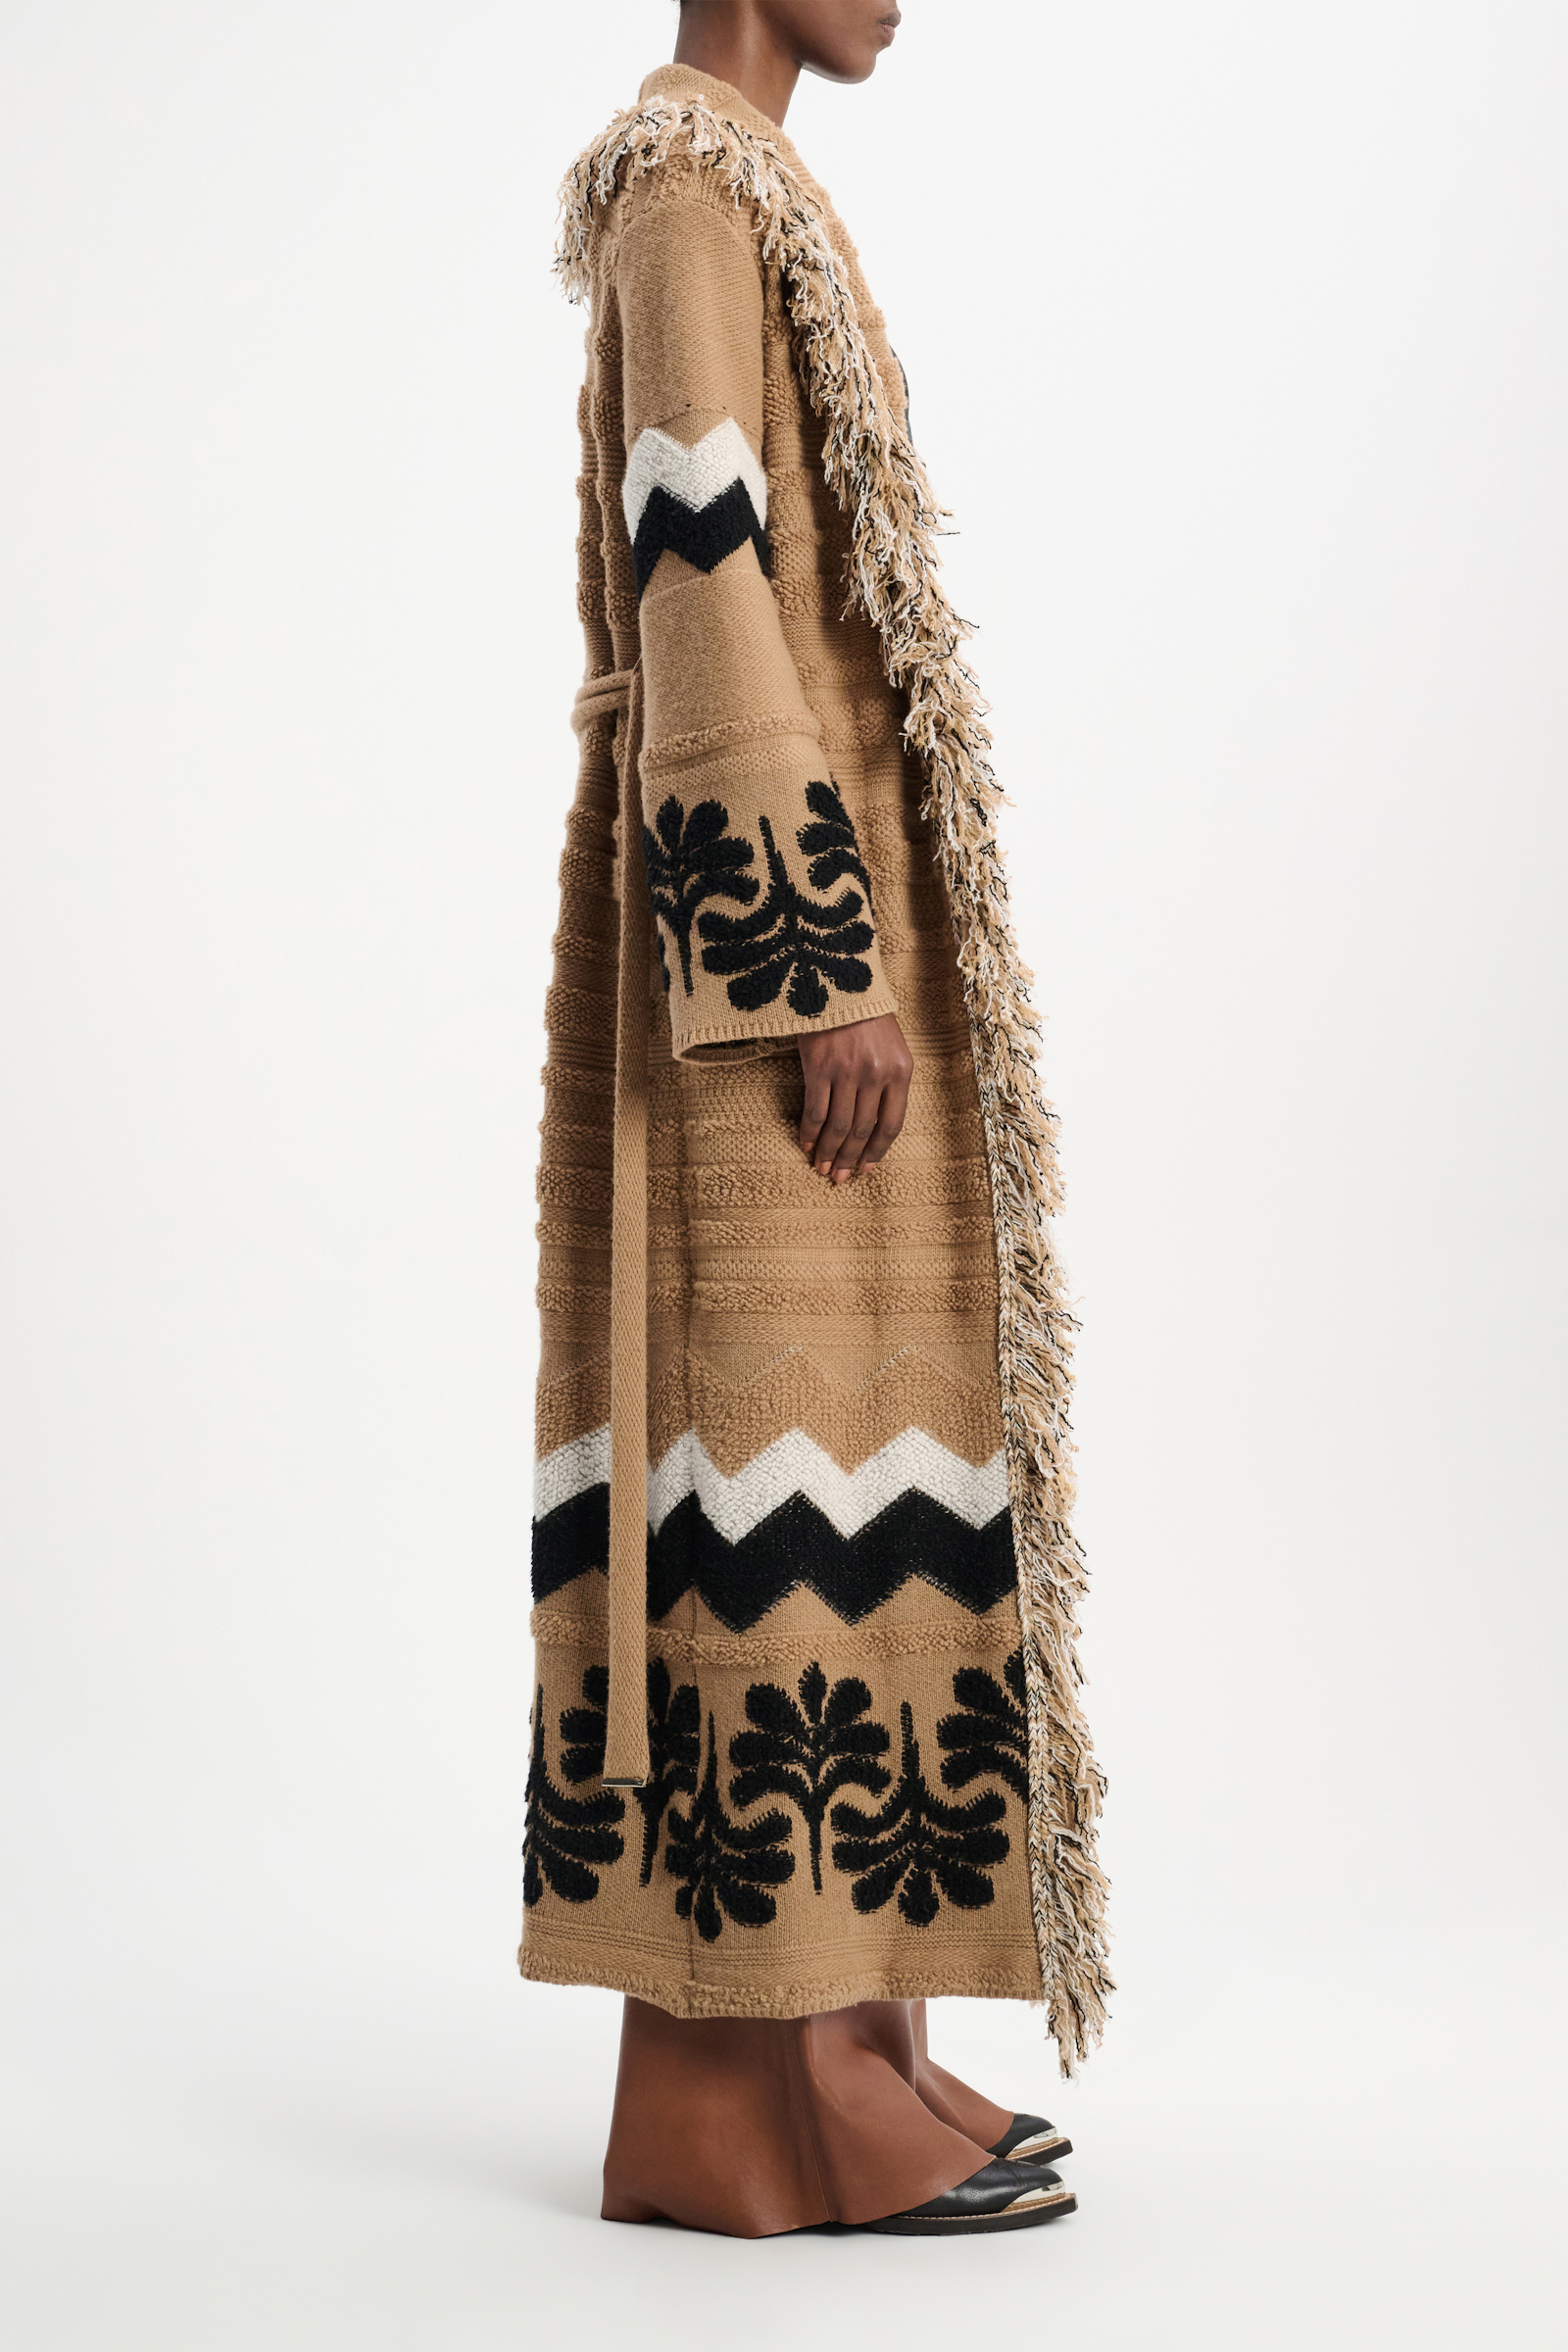 Dorothee Schumacher Jacquard knit coat with fringe adored brown